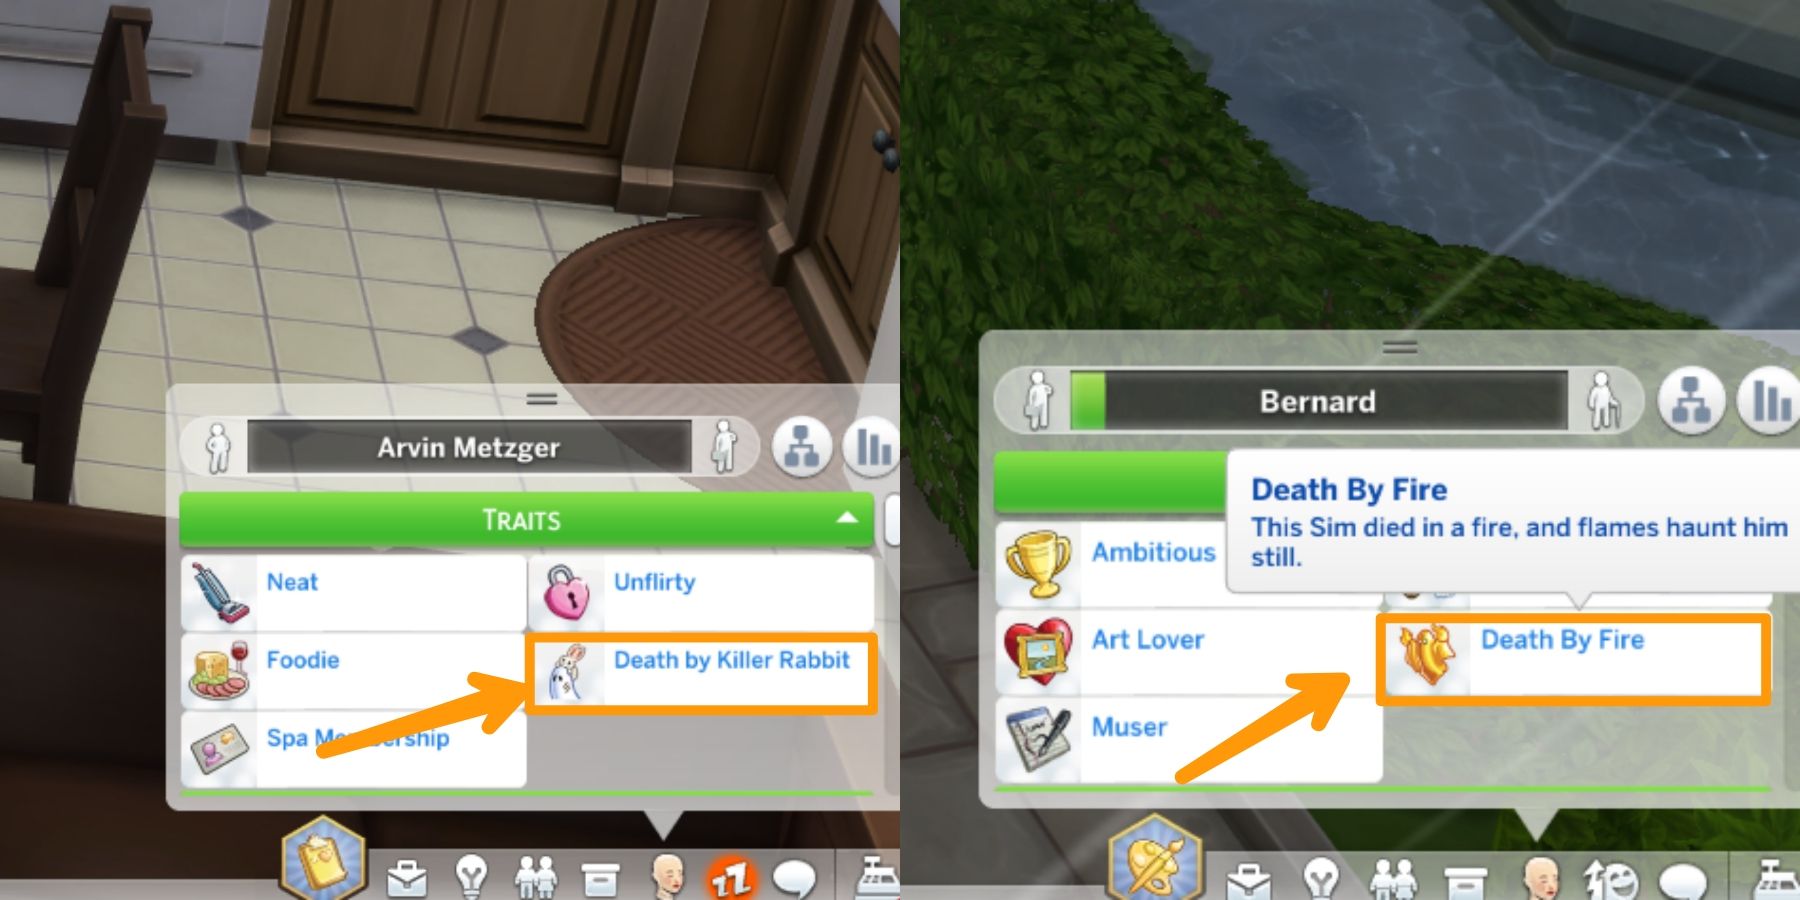 ghost traits in the Sims 4